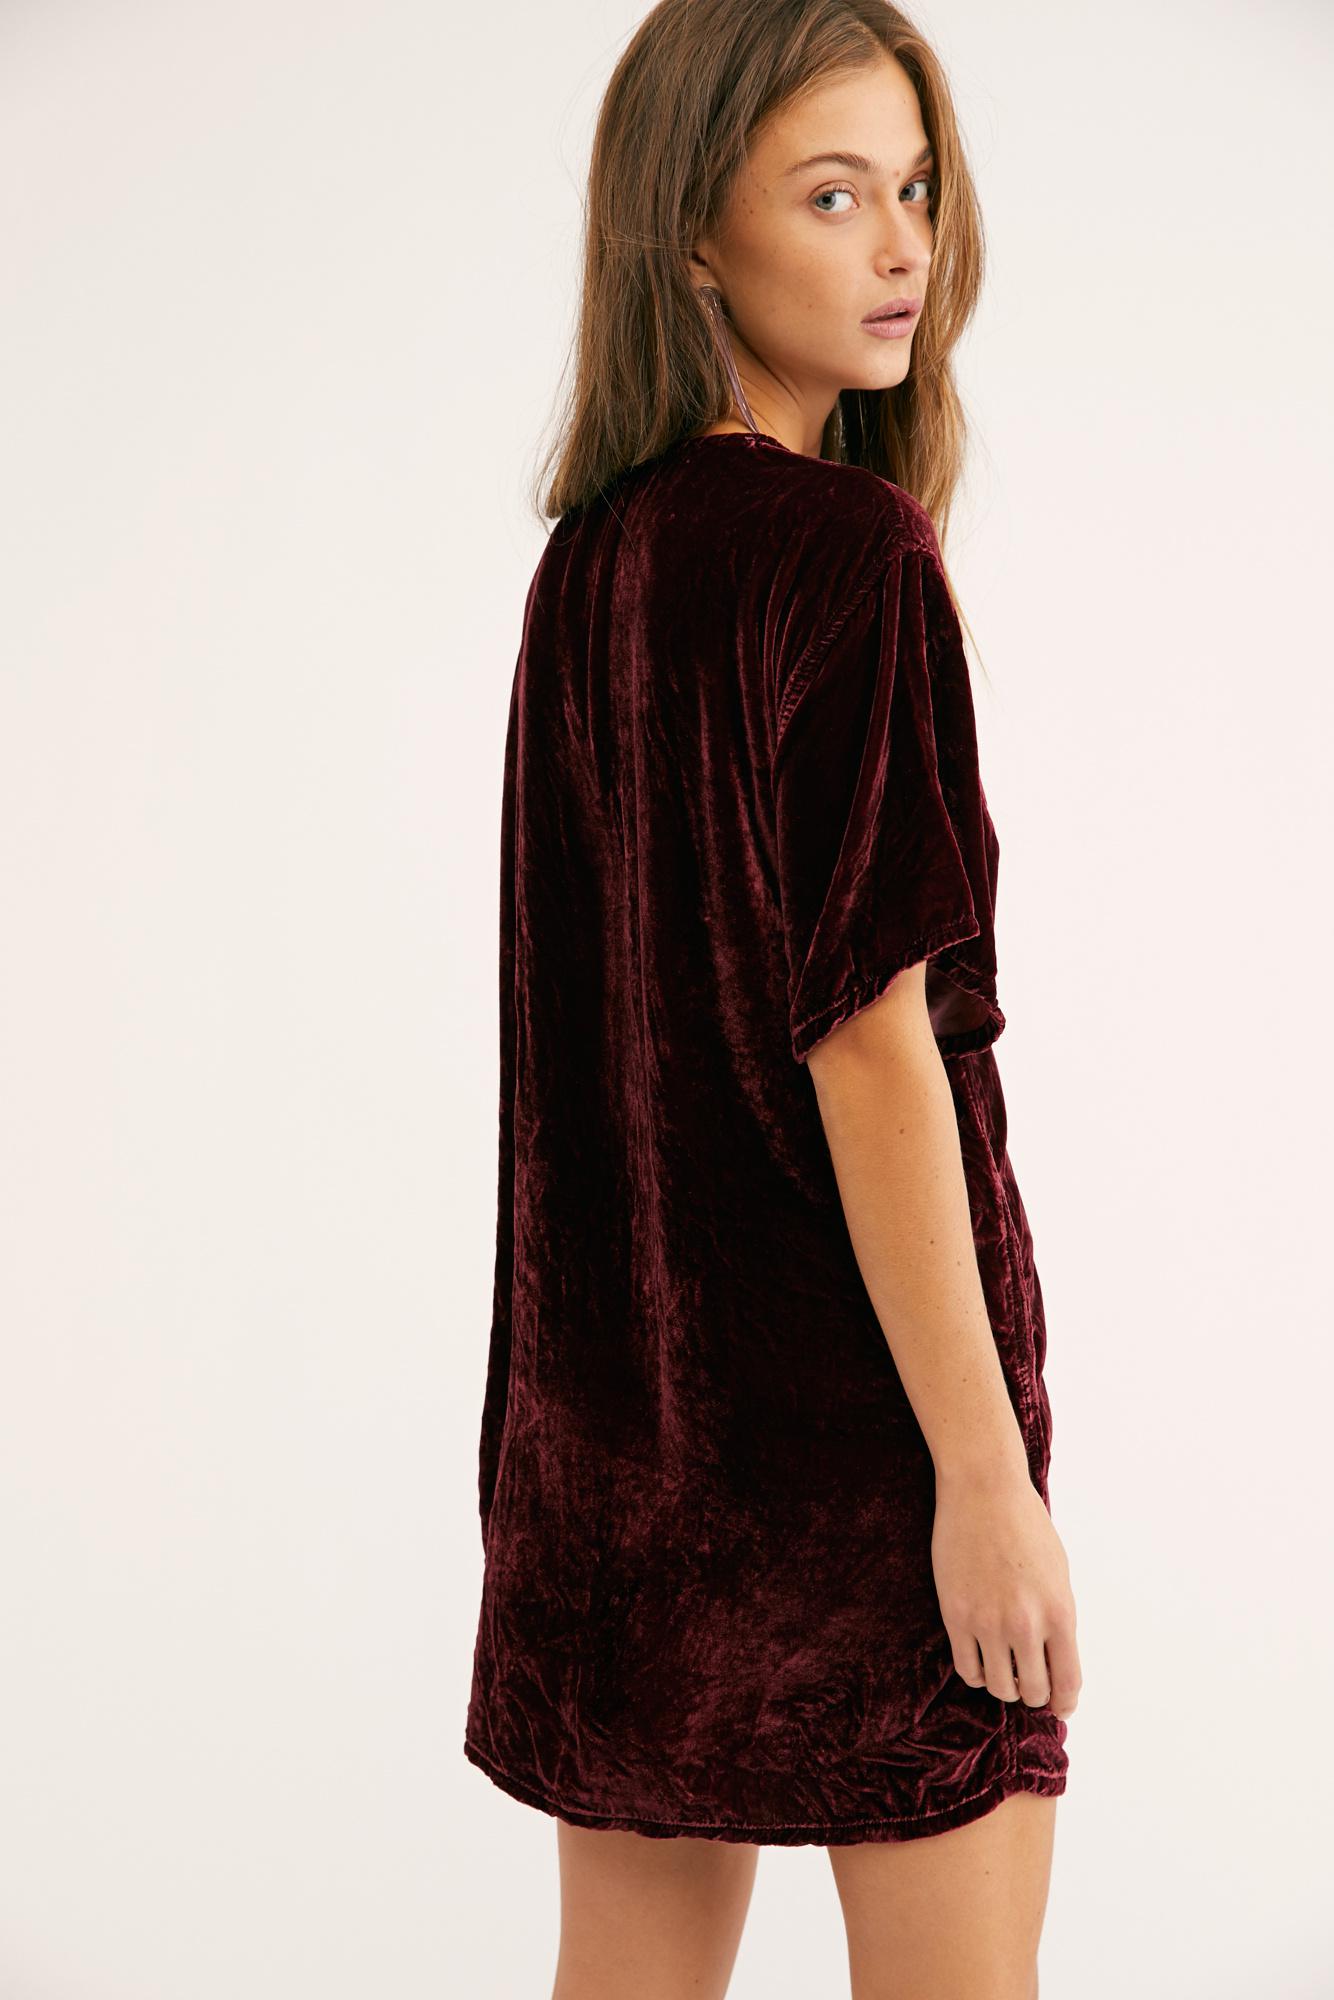 Free People Crushed Velvet T-shirt Dress By Cp Shades in Red - Lyst